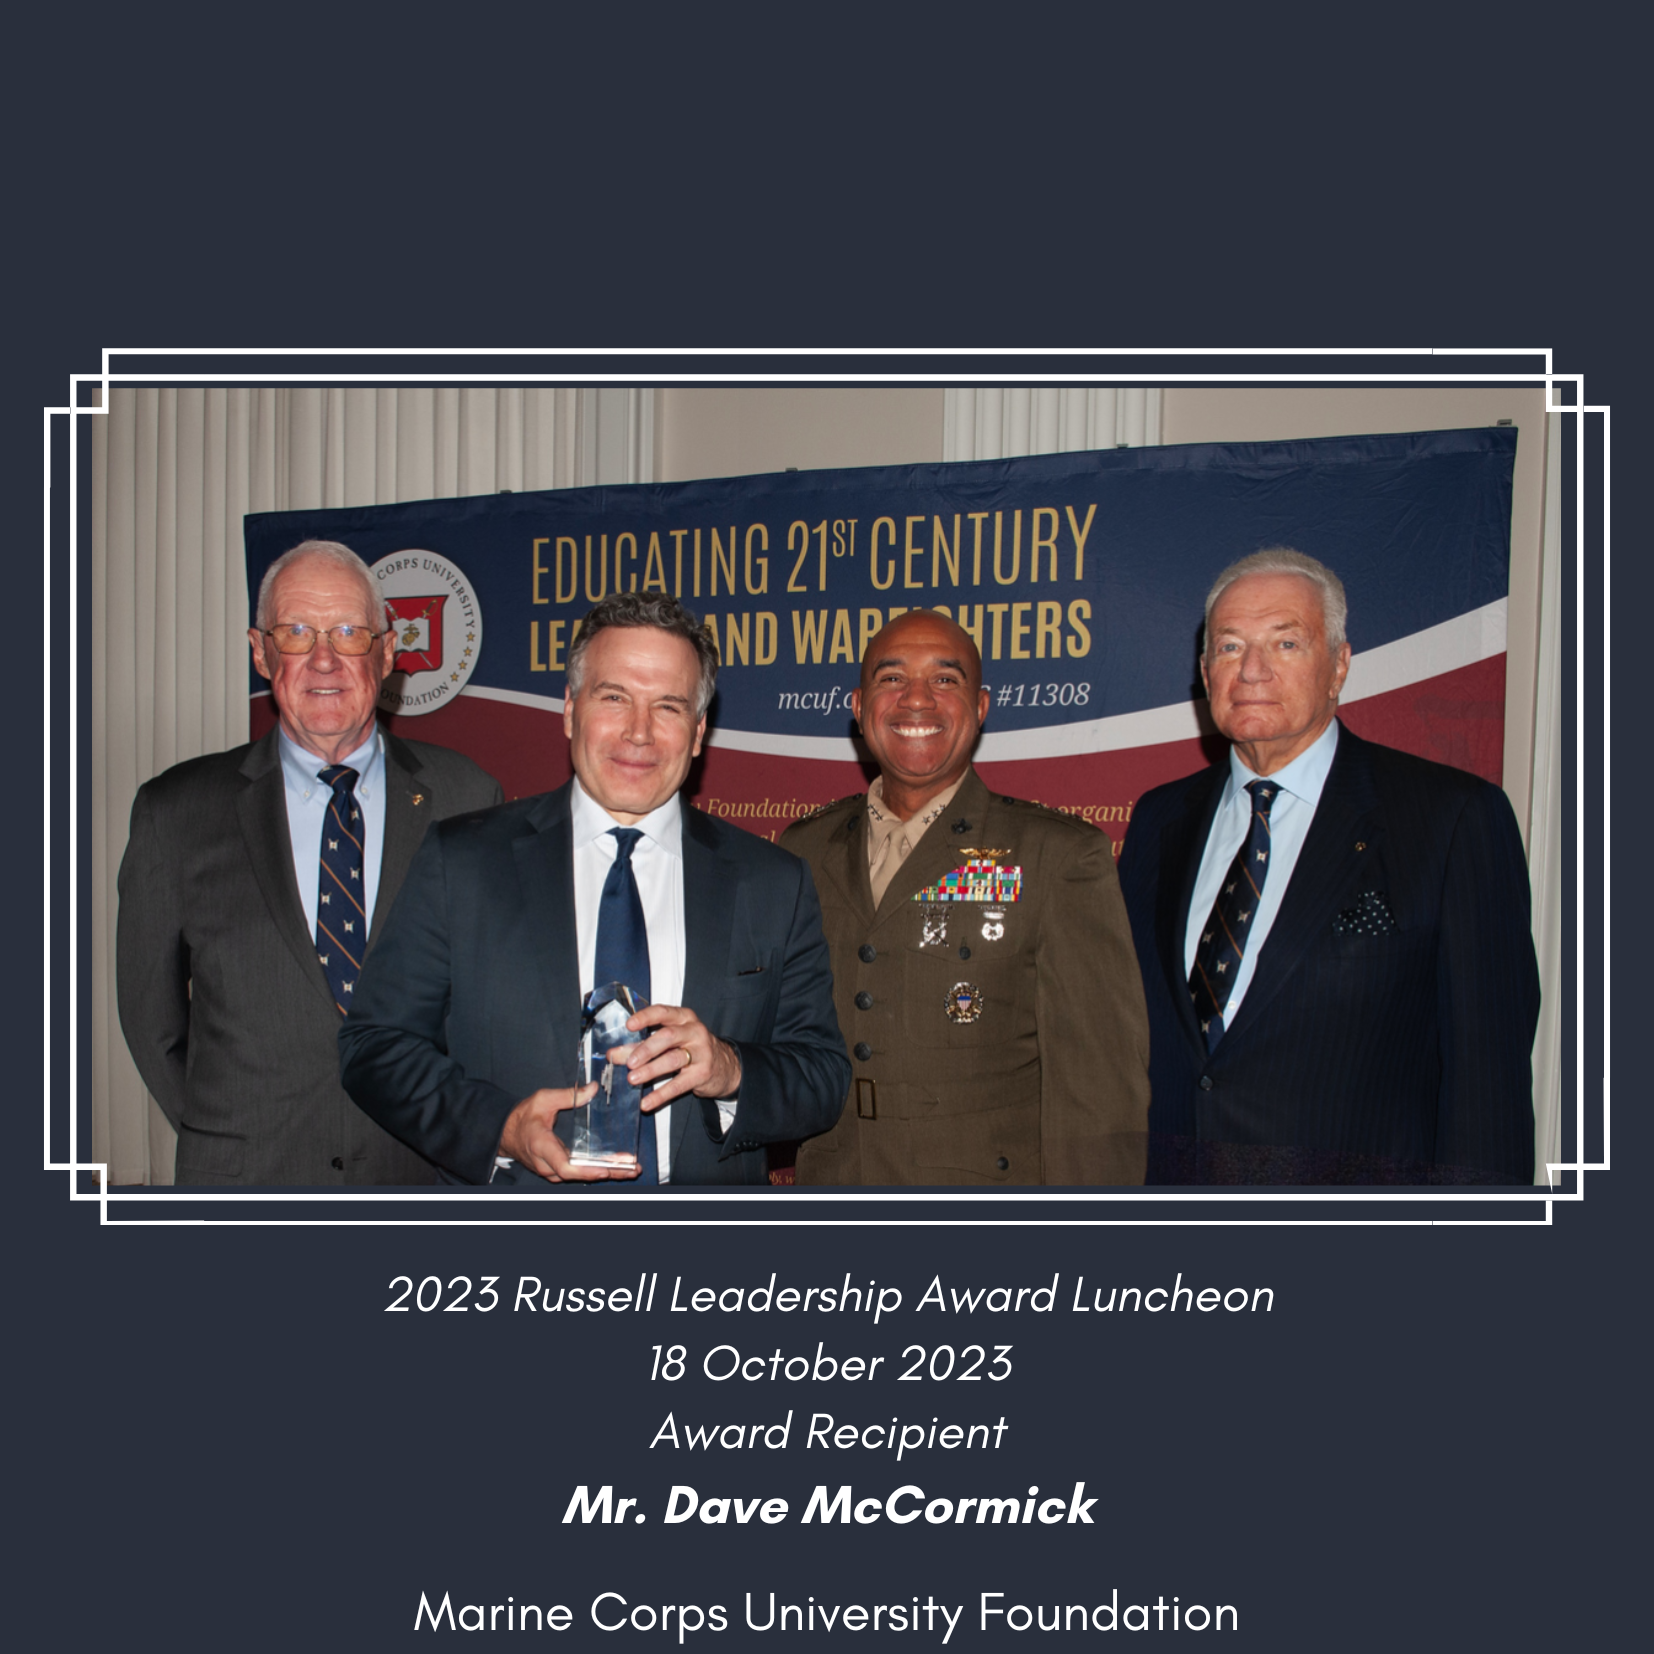 We had a wonderful time at the Russell Leadership Award Luncheon held October 18, 2023